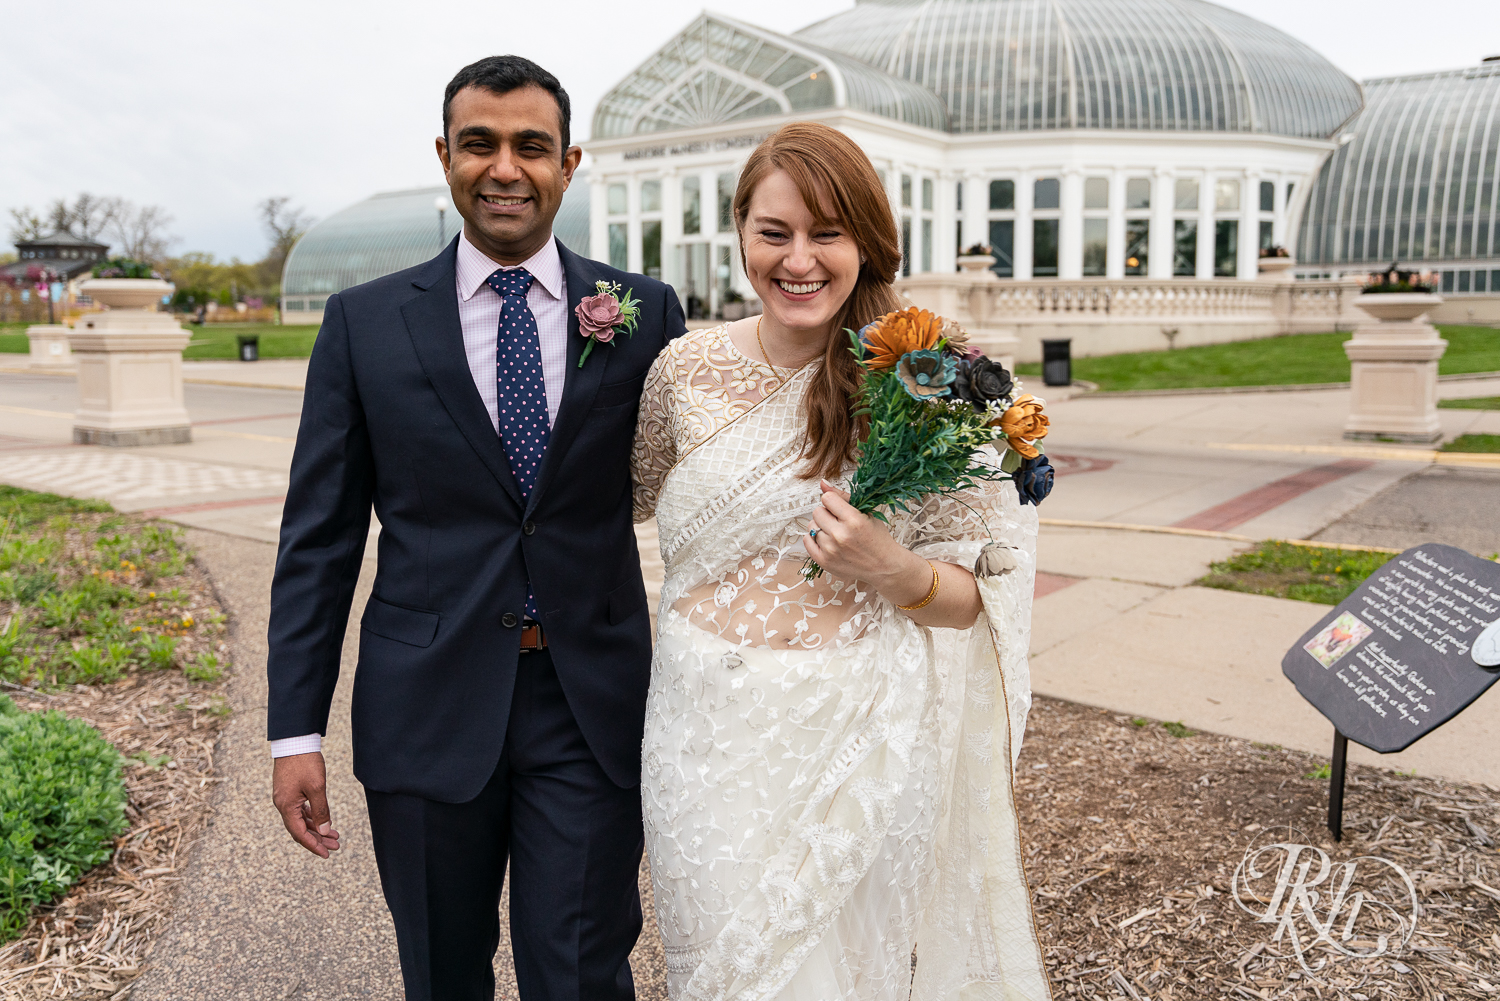 Bride and groom laugh outside at Indian wedding at Como Zoo Conservatory in Saint Paul, Minnesota.